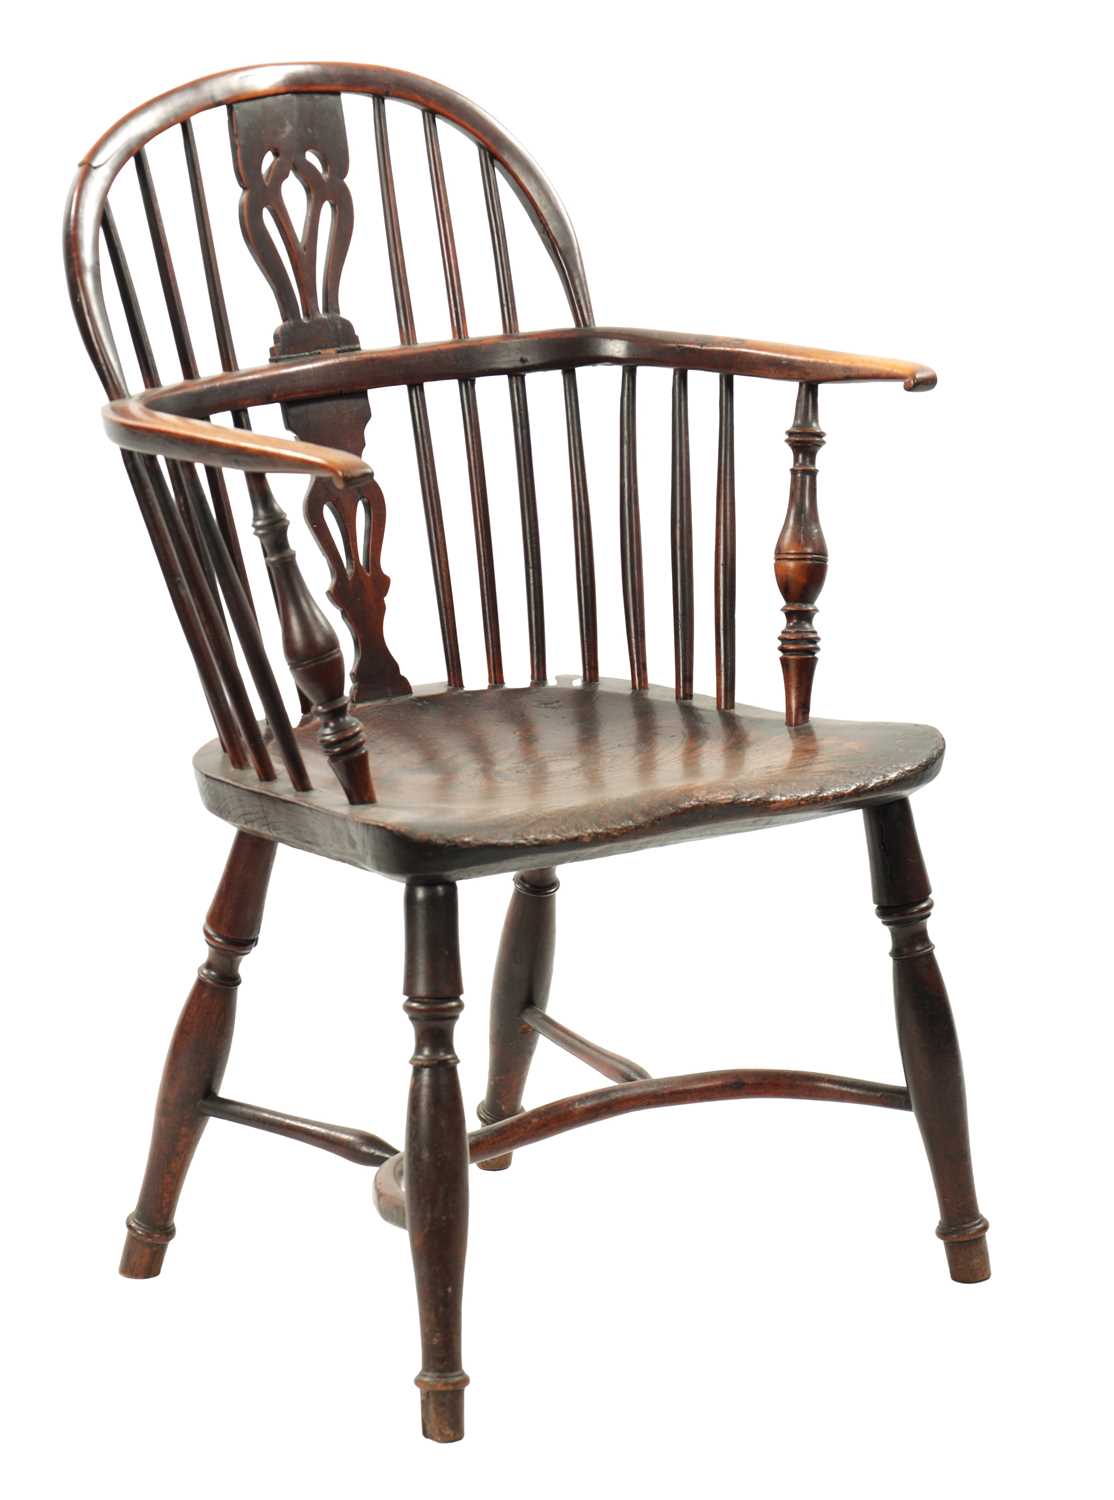 AN EARLY 19TH CENTURY YEW WOOD LOW BACK WINDSOR CHAIR